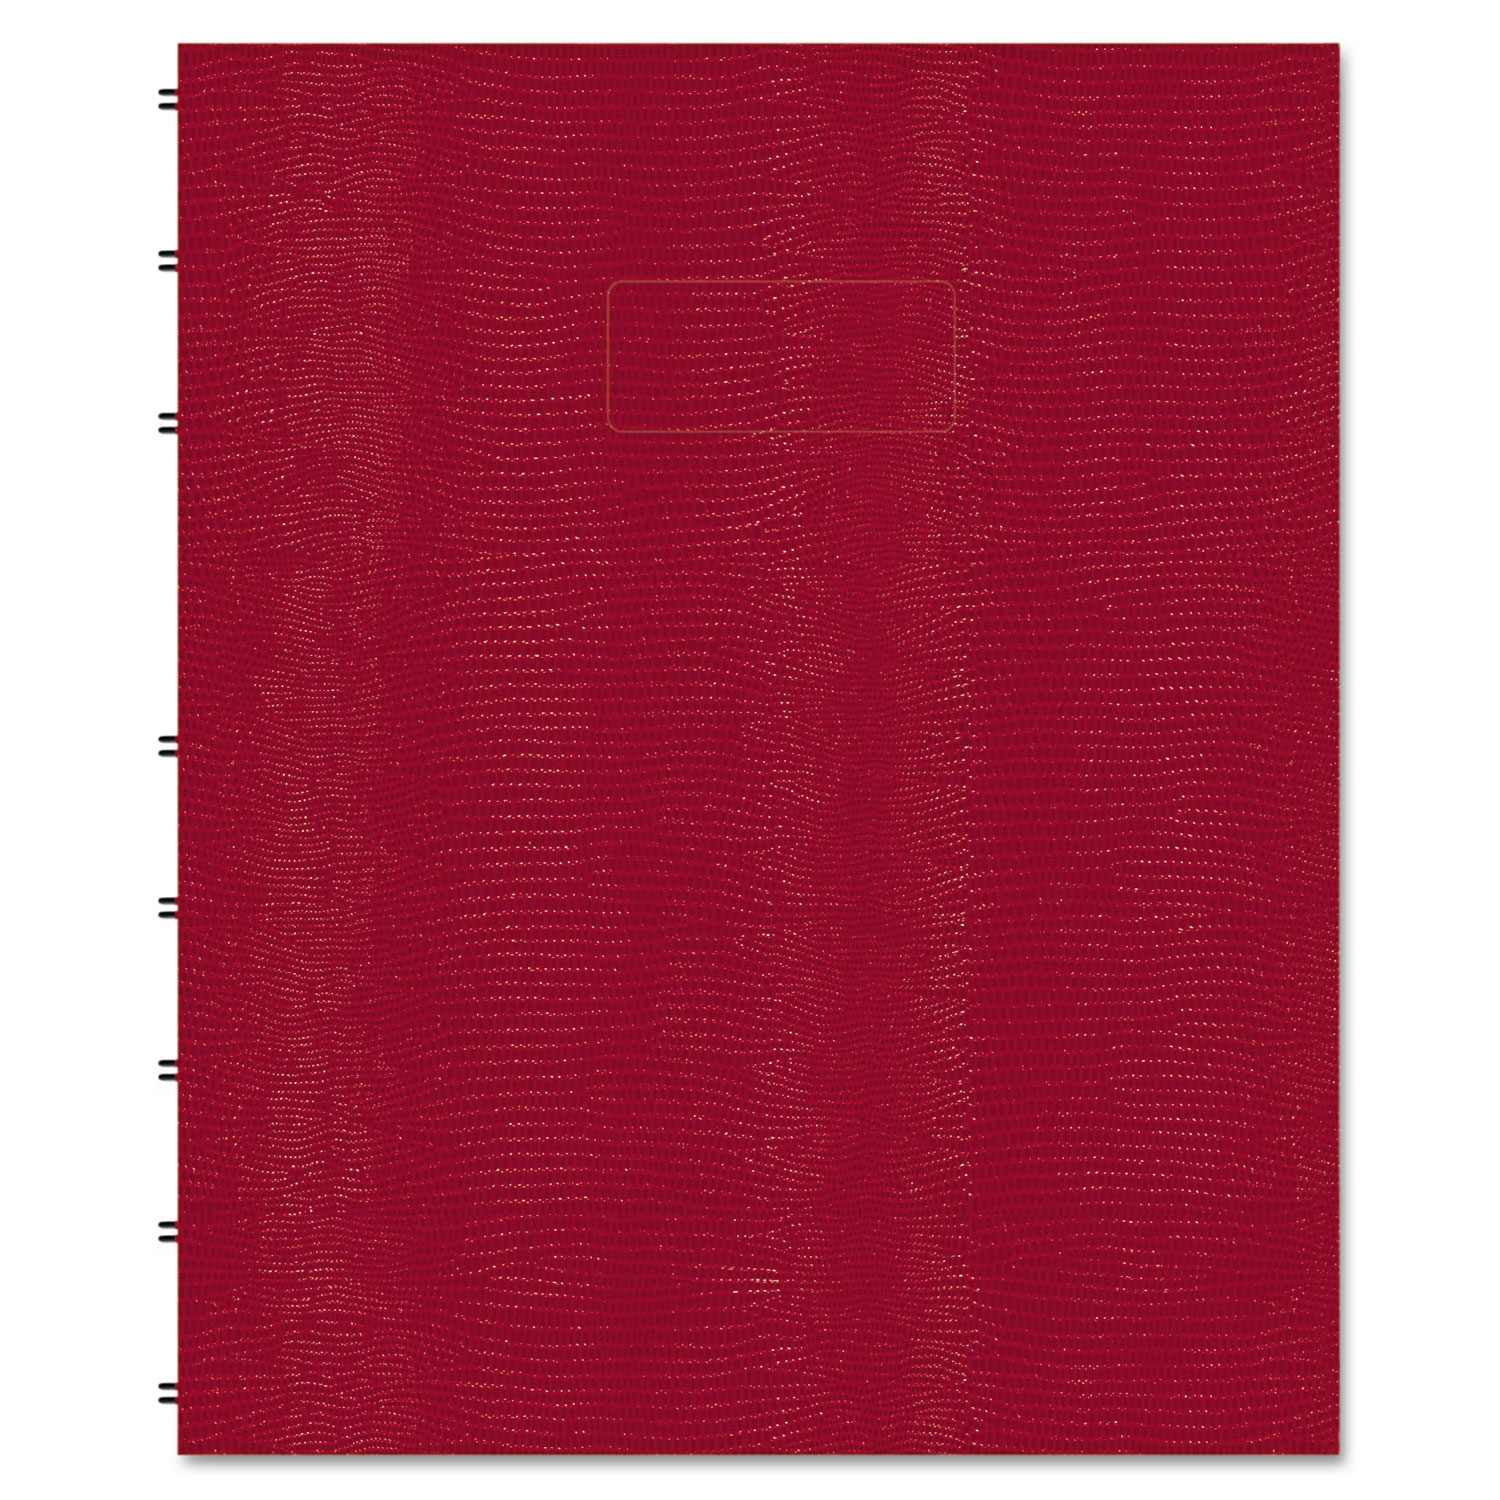 MiracleBind Notebook, 1 Subject, Medium/College Rule, Red Cover, 9.25 x 7.25, 75 Pages